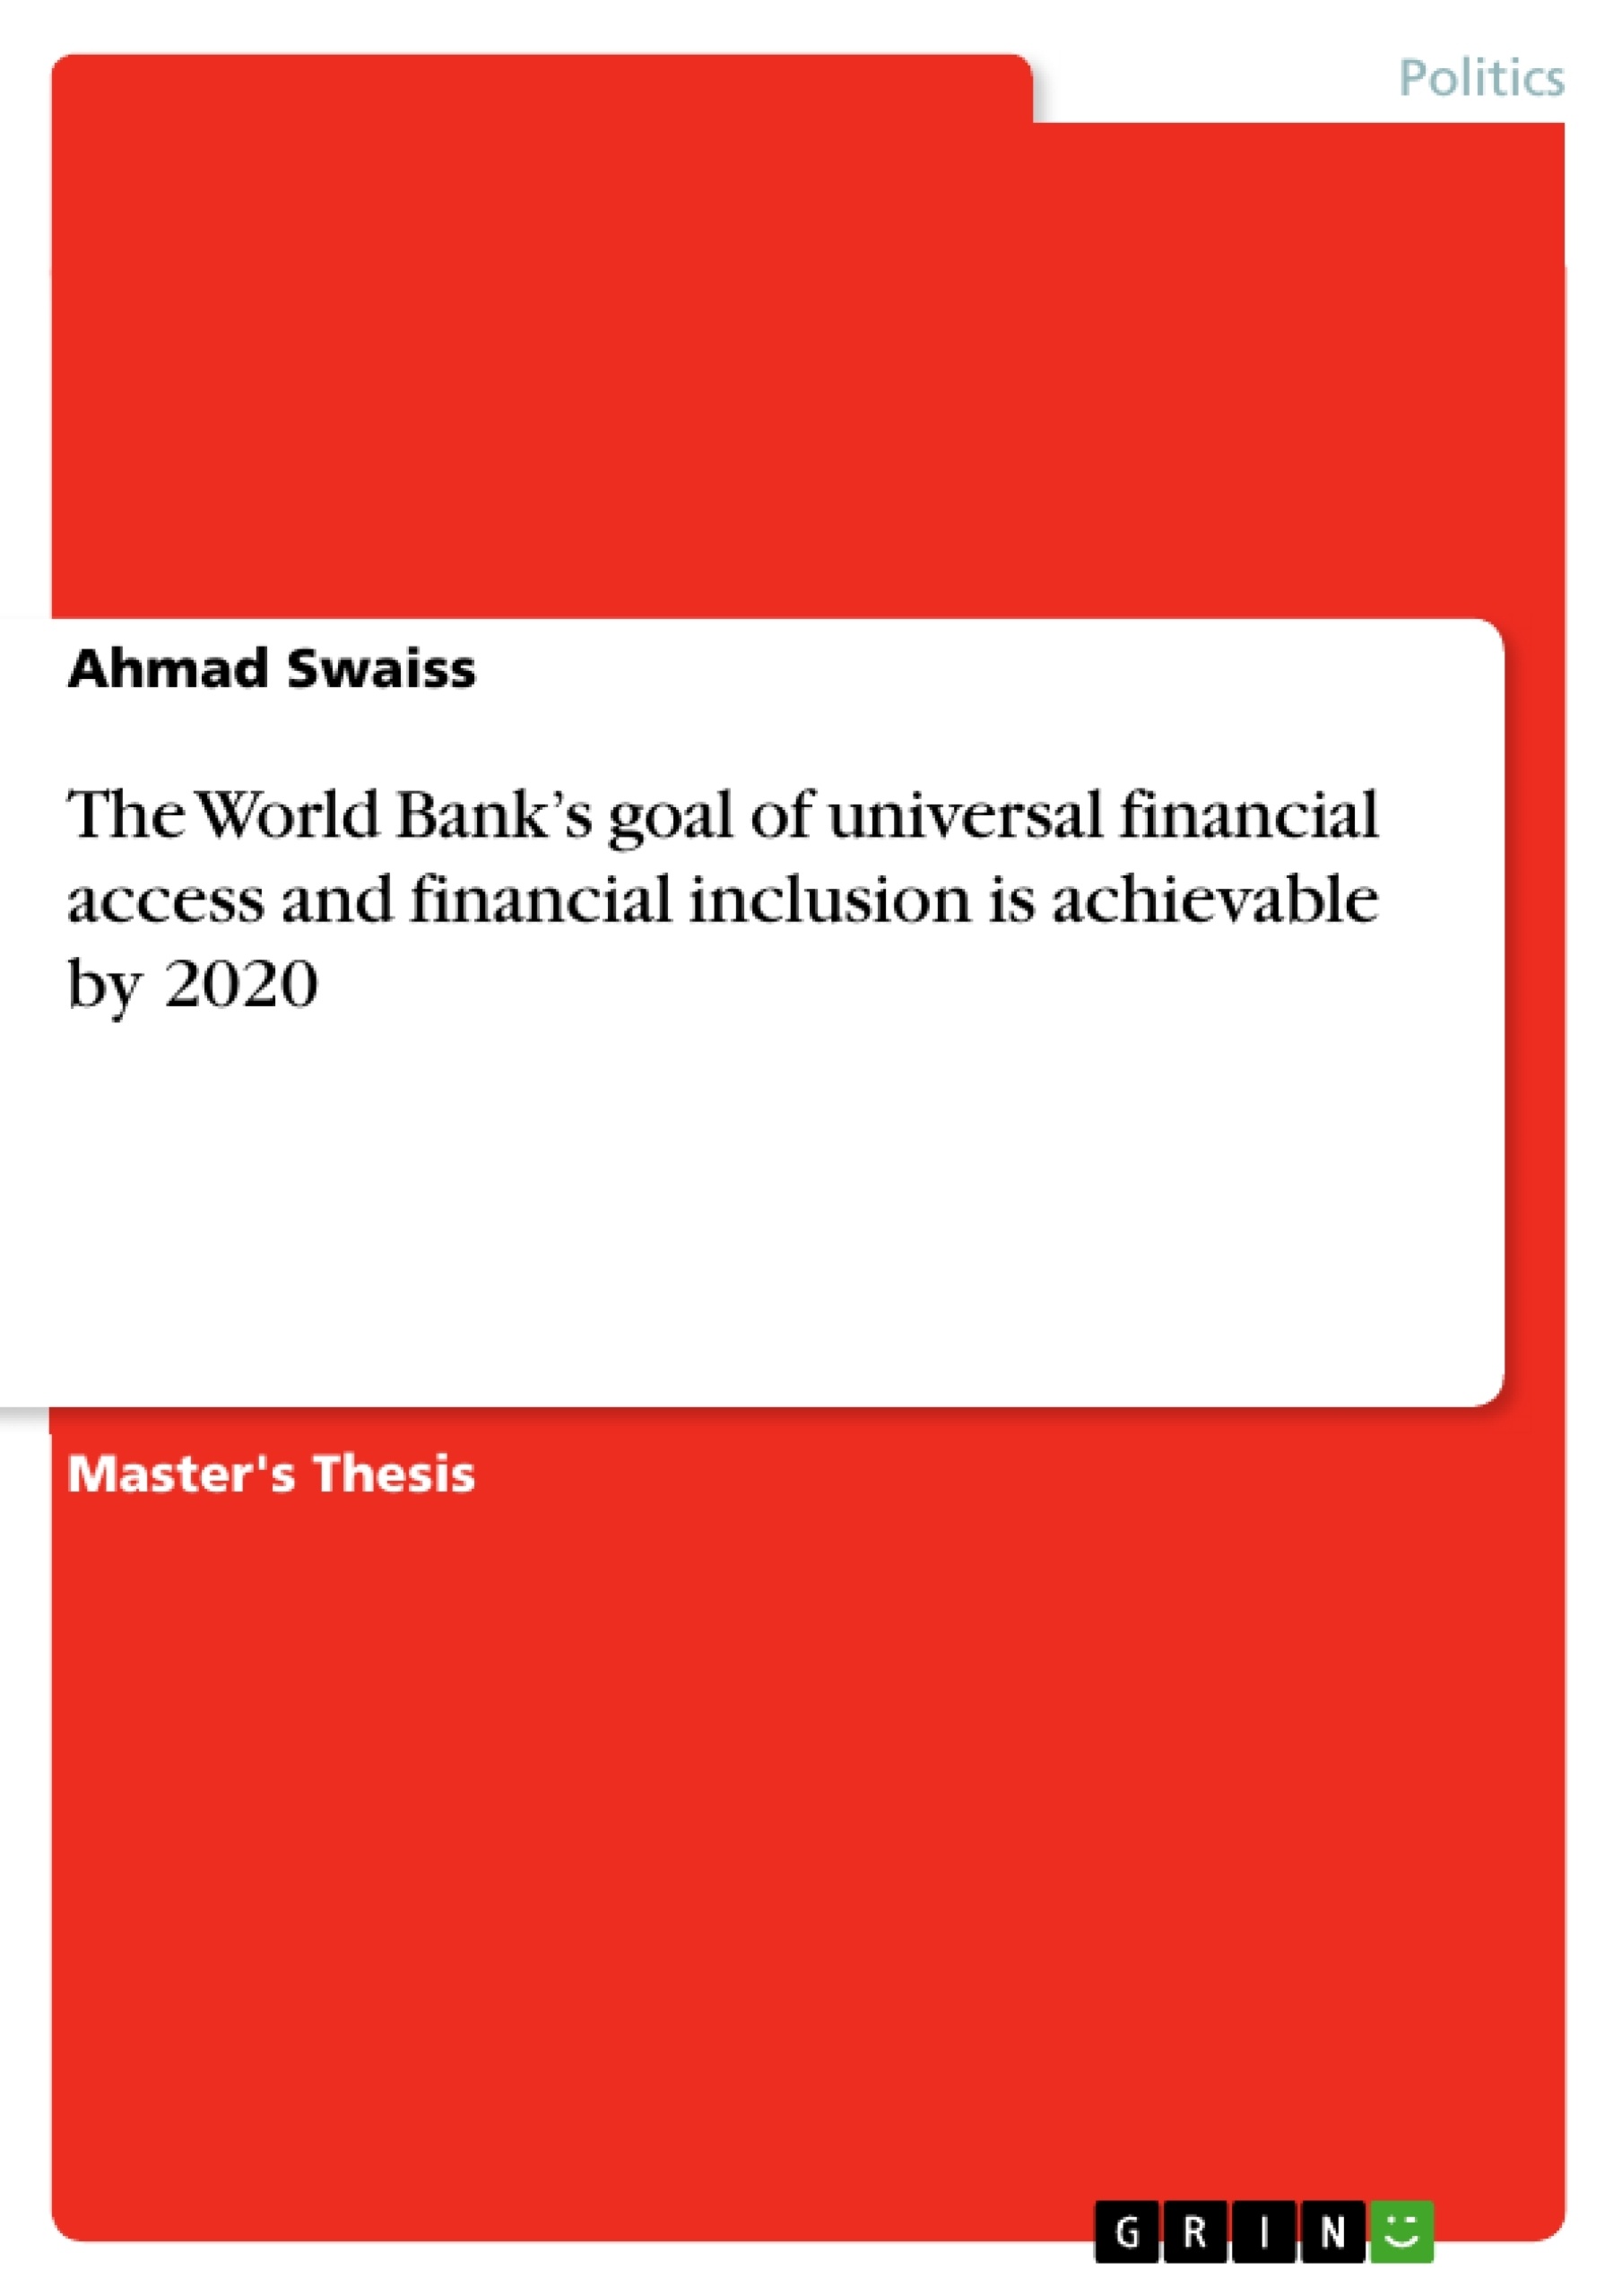 Title: The World Bank’s goal of universal financial access and financial inclusion is achievable by 2020